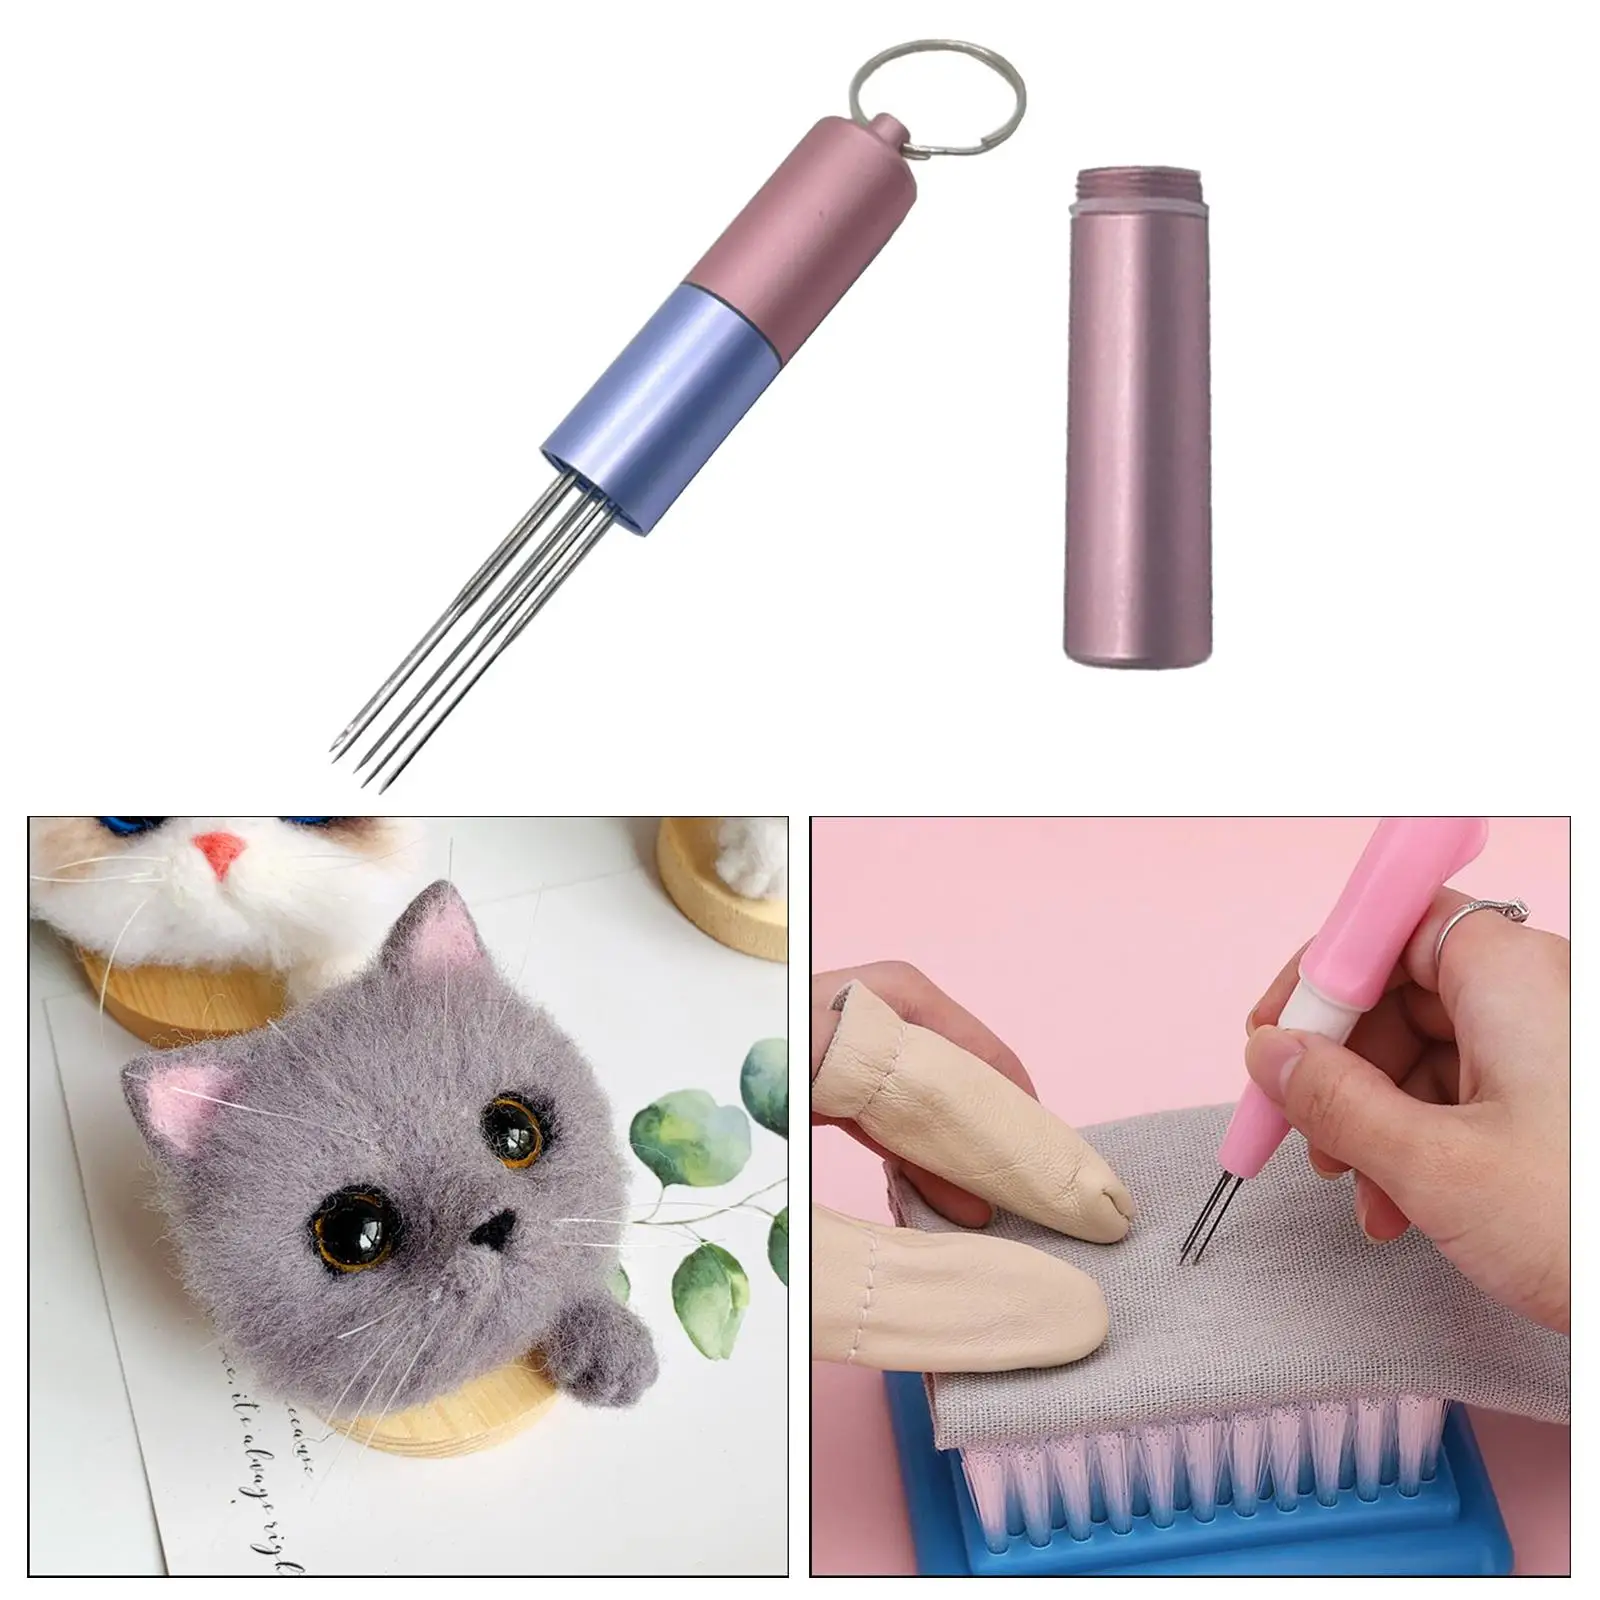 Embroidery Punch NeedleFelting Needle Embroidery Punch Pen with 6 Tool Wool Felting Supplies DIY Crafting